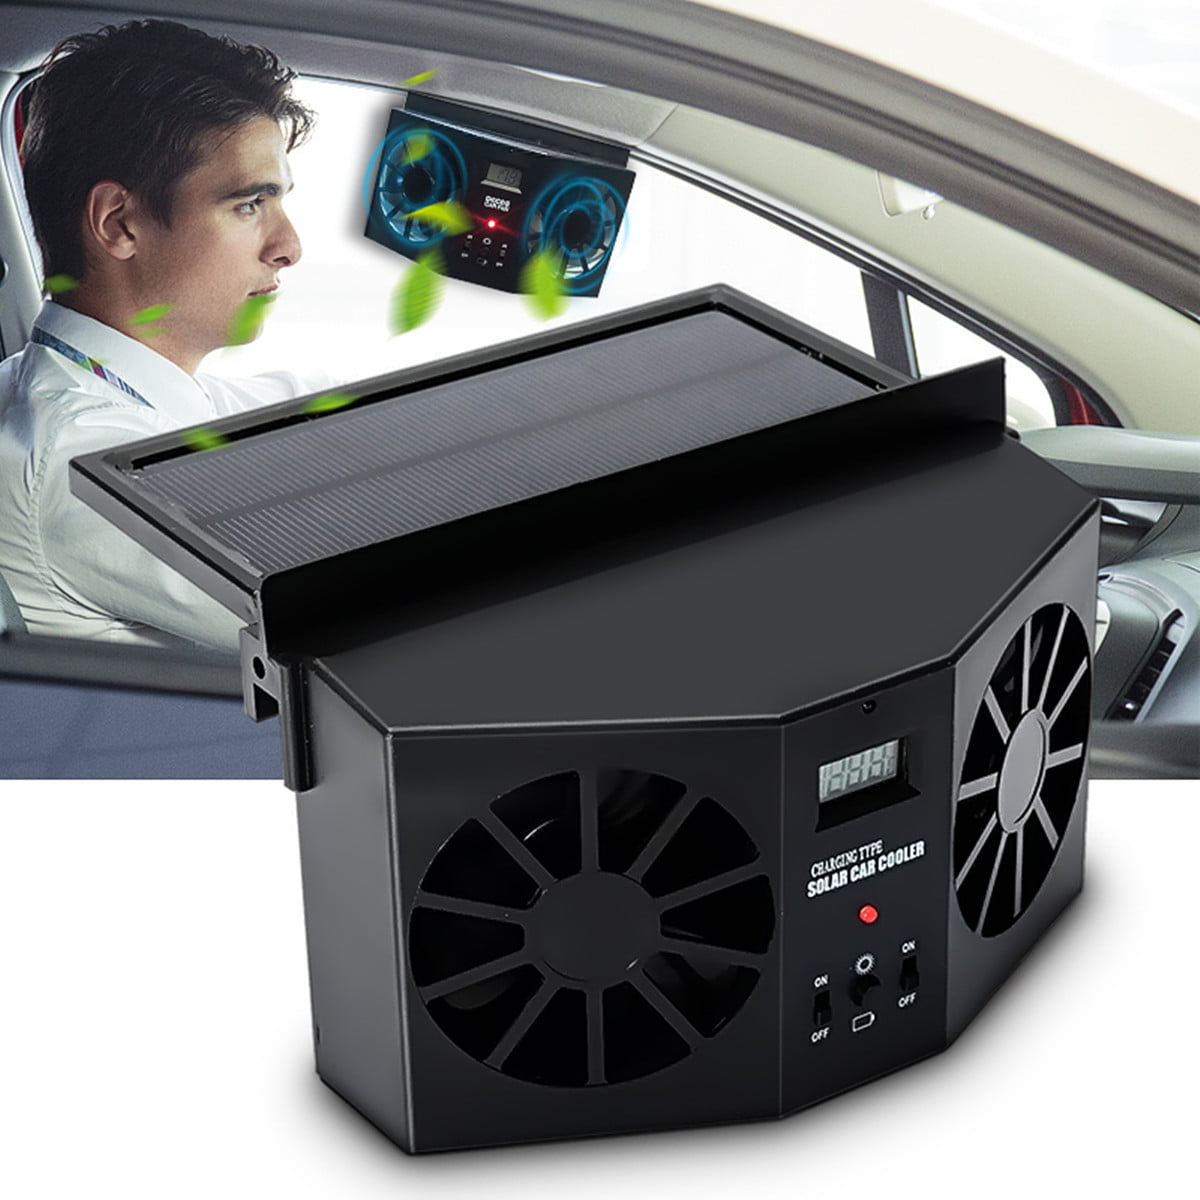 Car Window Windshield Solar Power Air Vent Cool Exhaust Dual Fan System Cooler Black